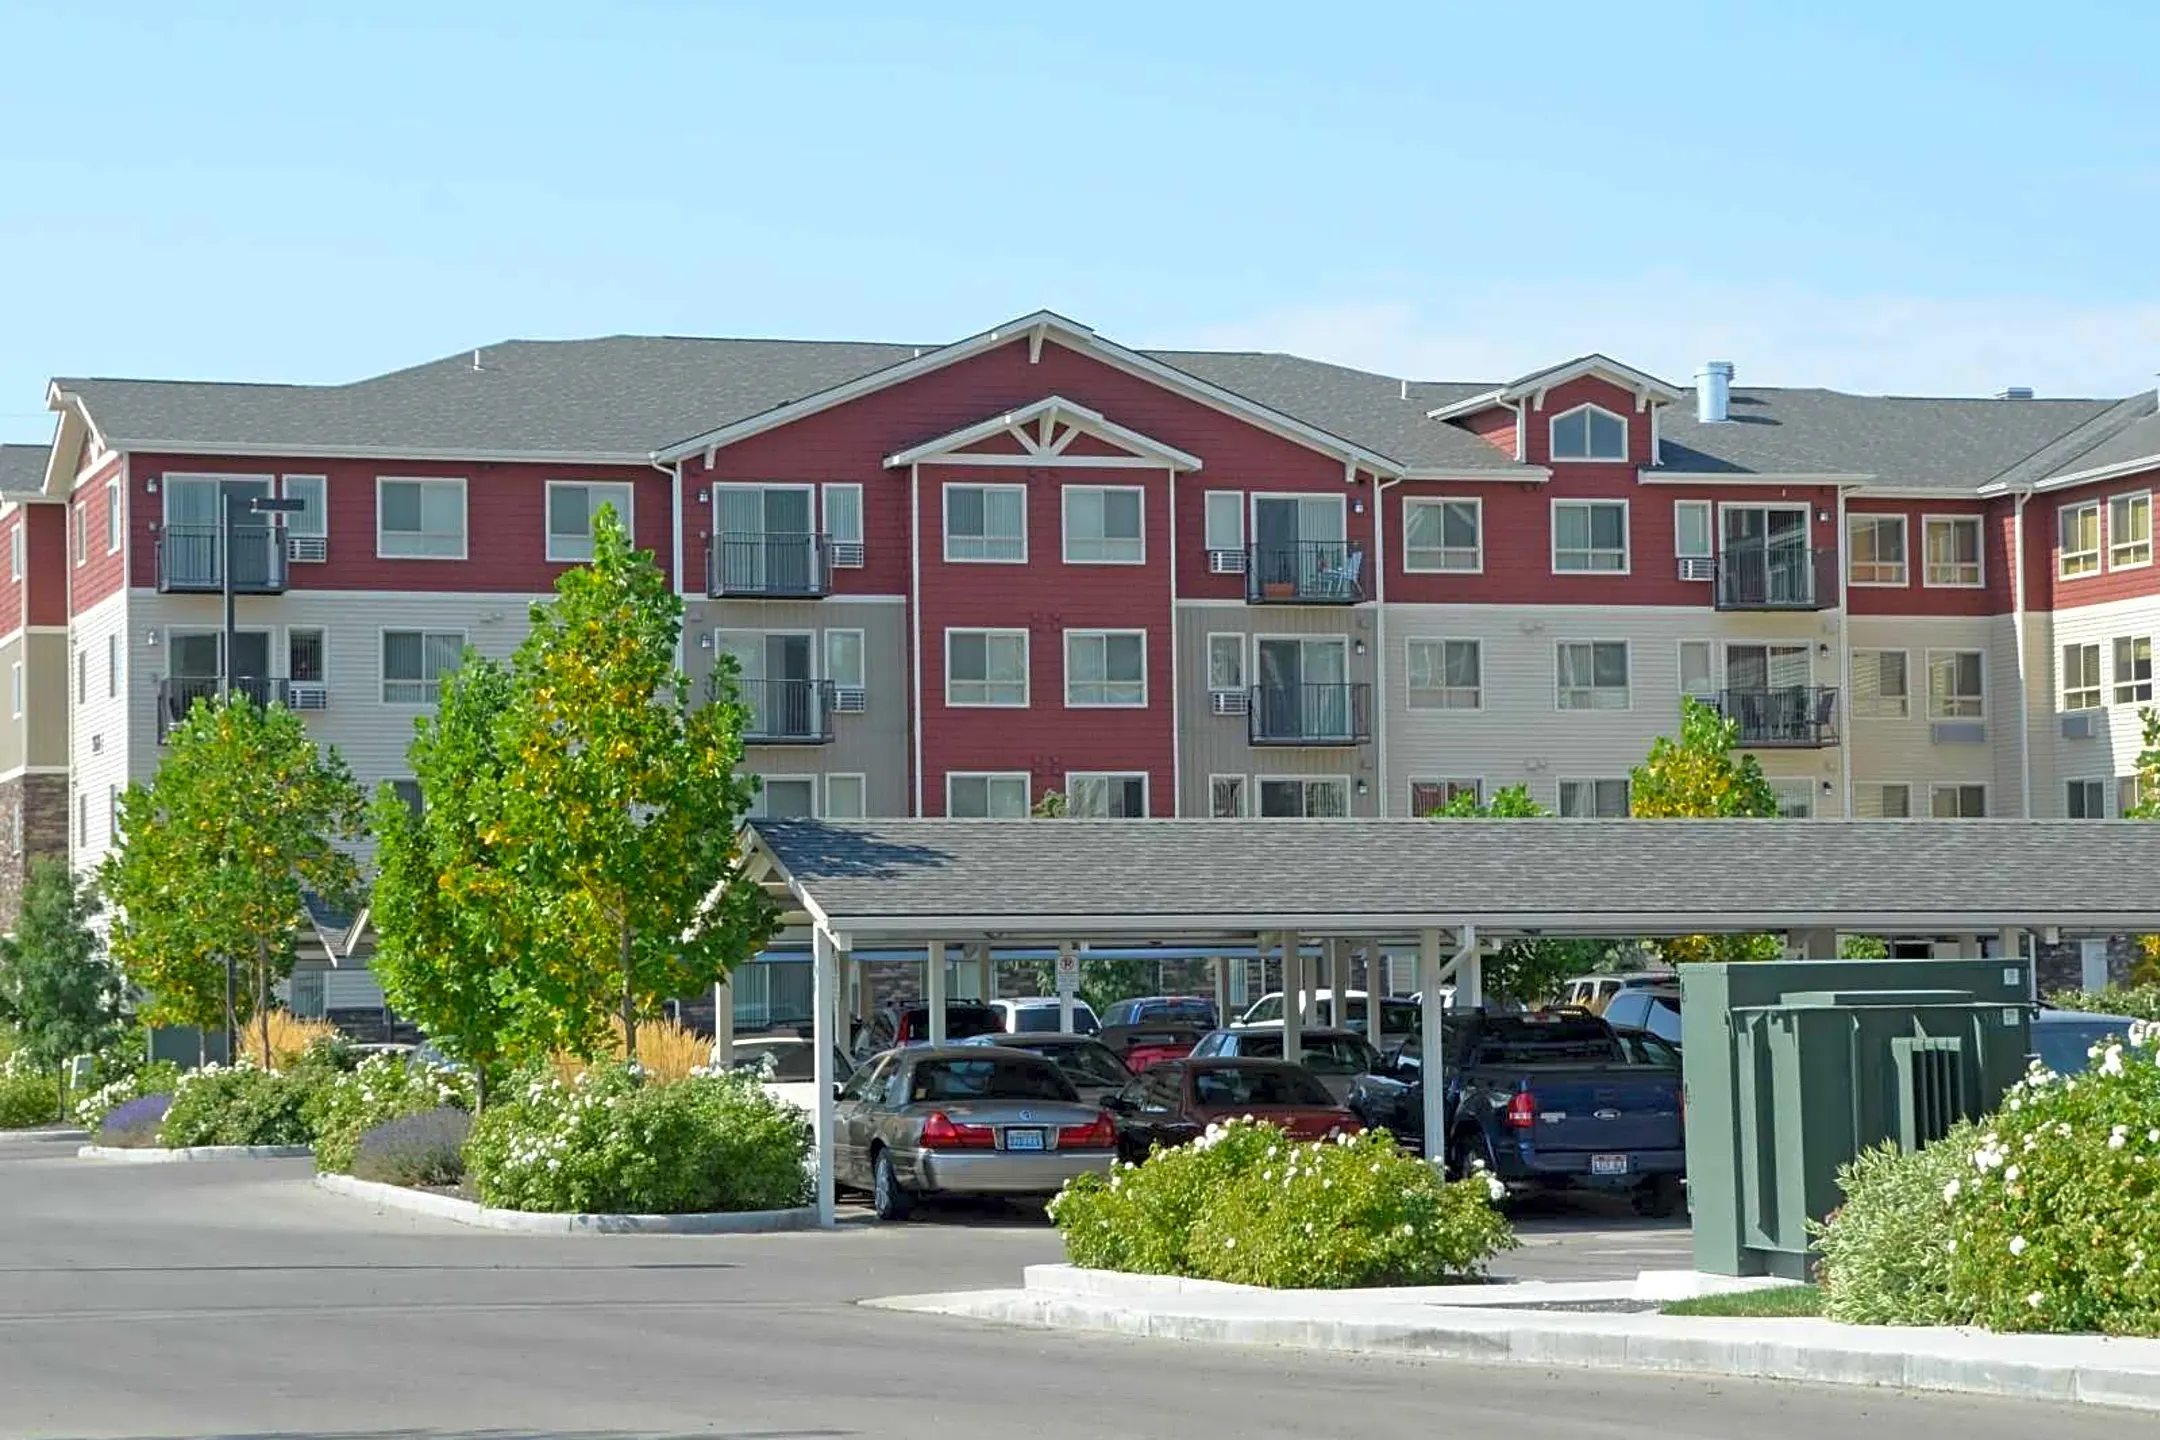 Building - Affinity at Boise 55+ Living - Boise, ID